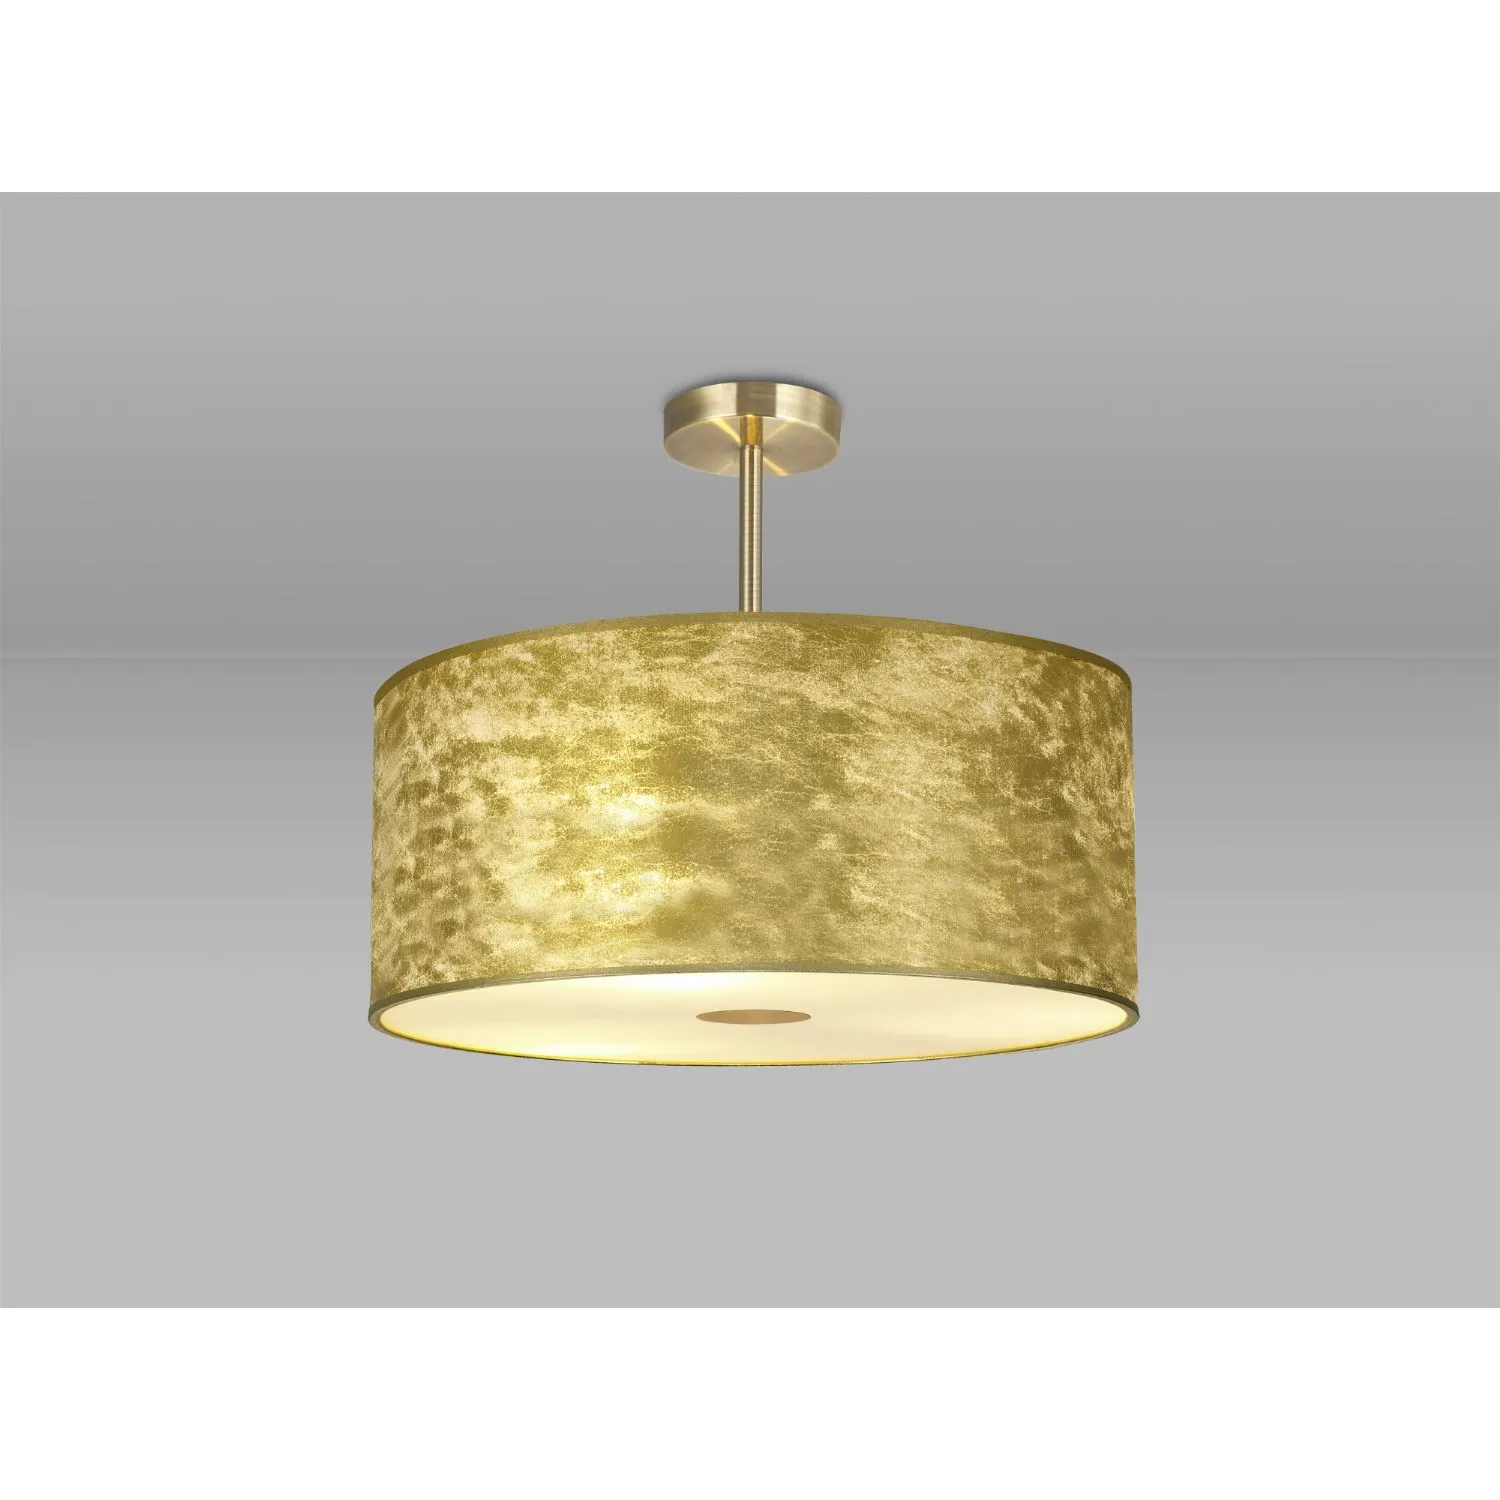 Baymont Antique Brass 5 Light E27 Semi Flush Fixture With 600mm Gold Leaf Shade With Frosted Acrylic Diffuser With Antique Brass Centre